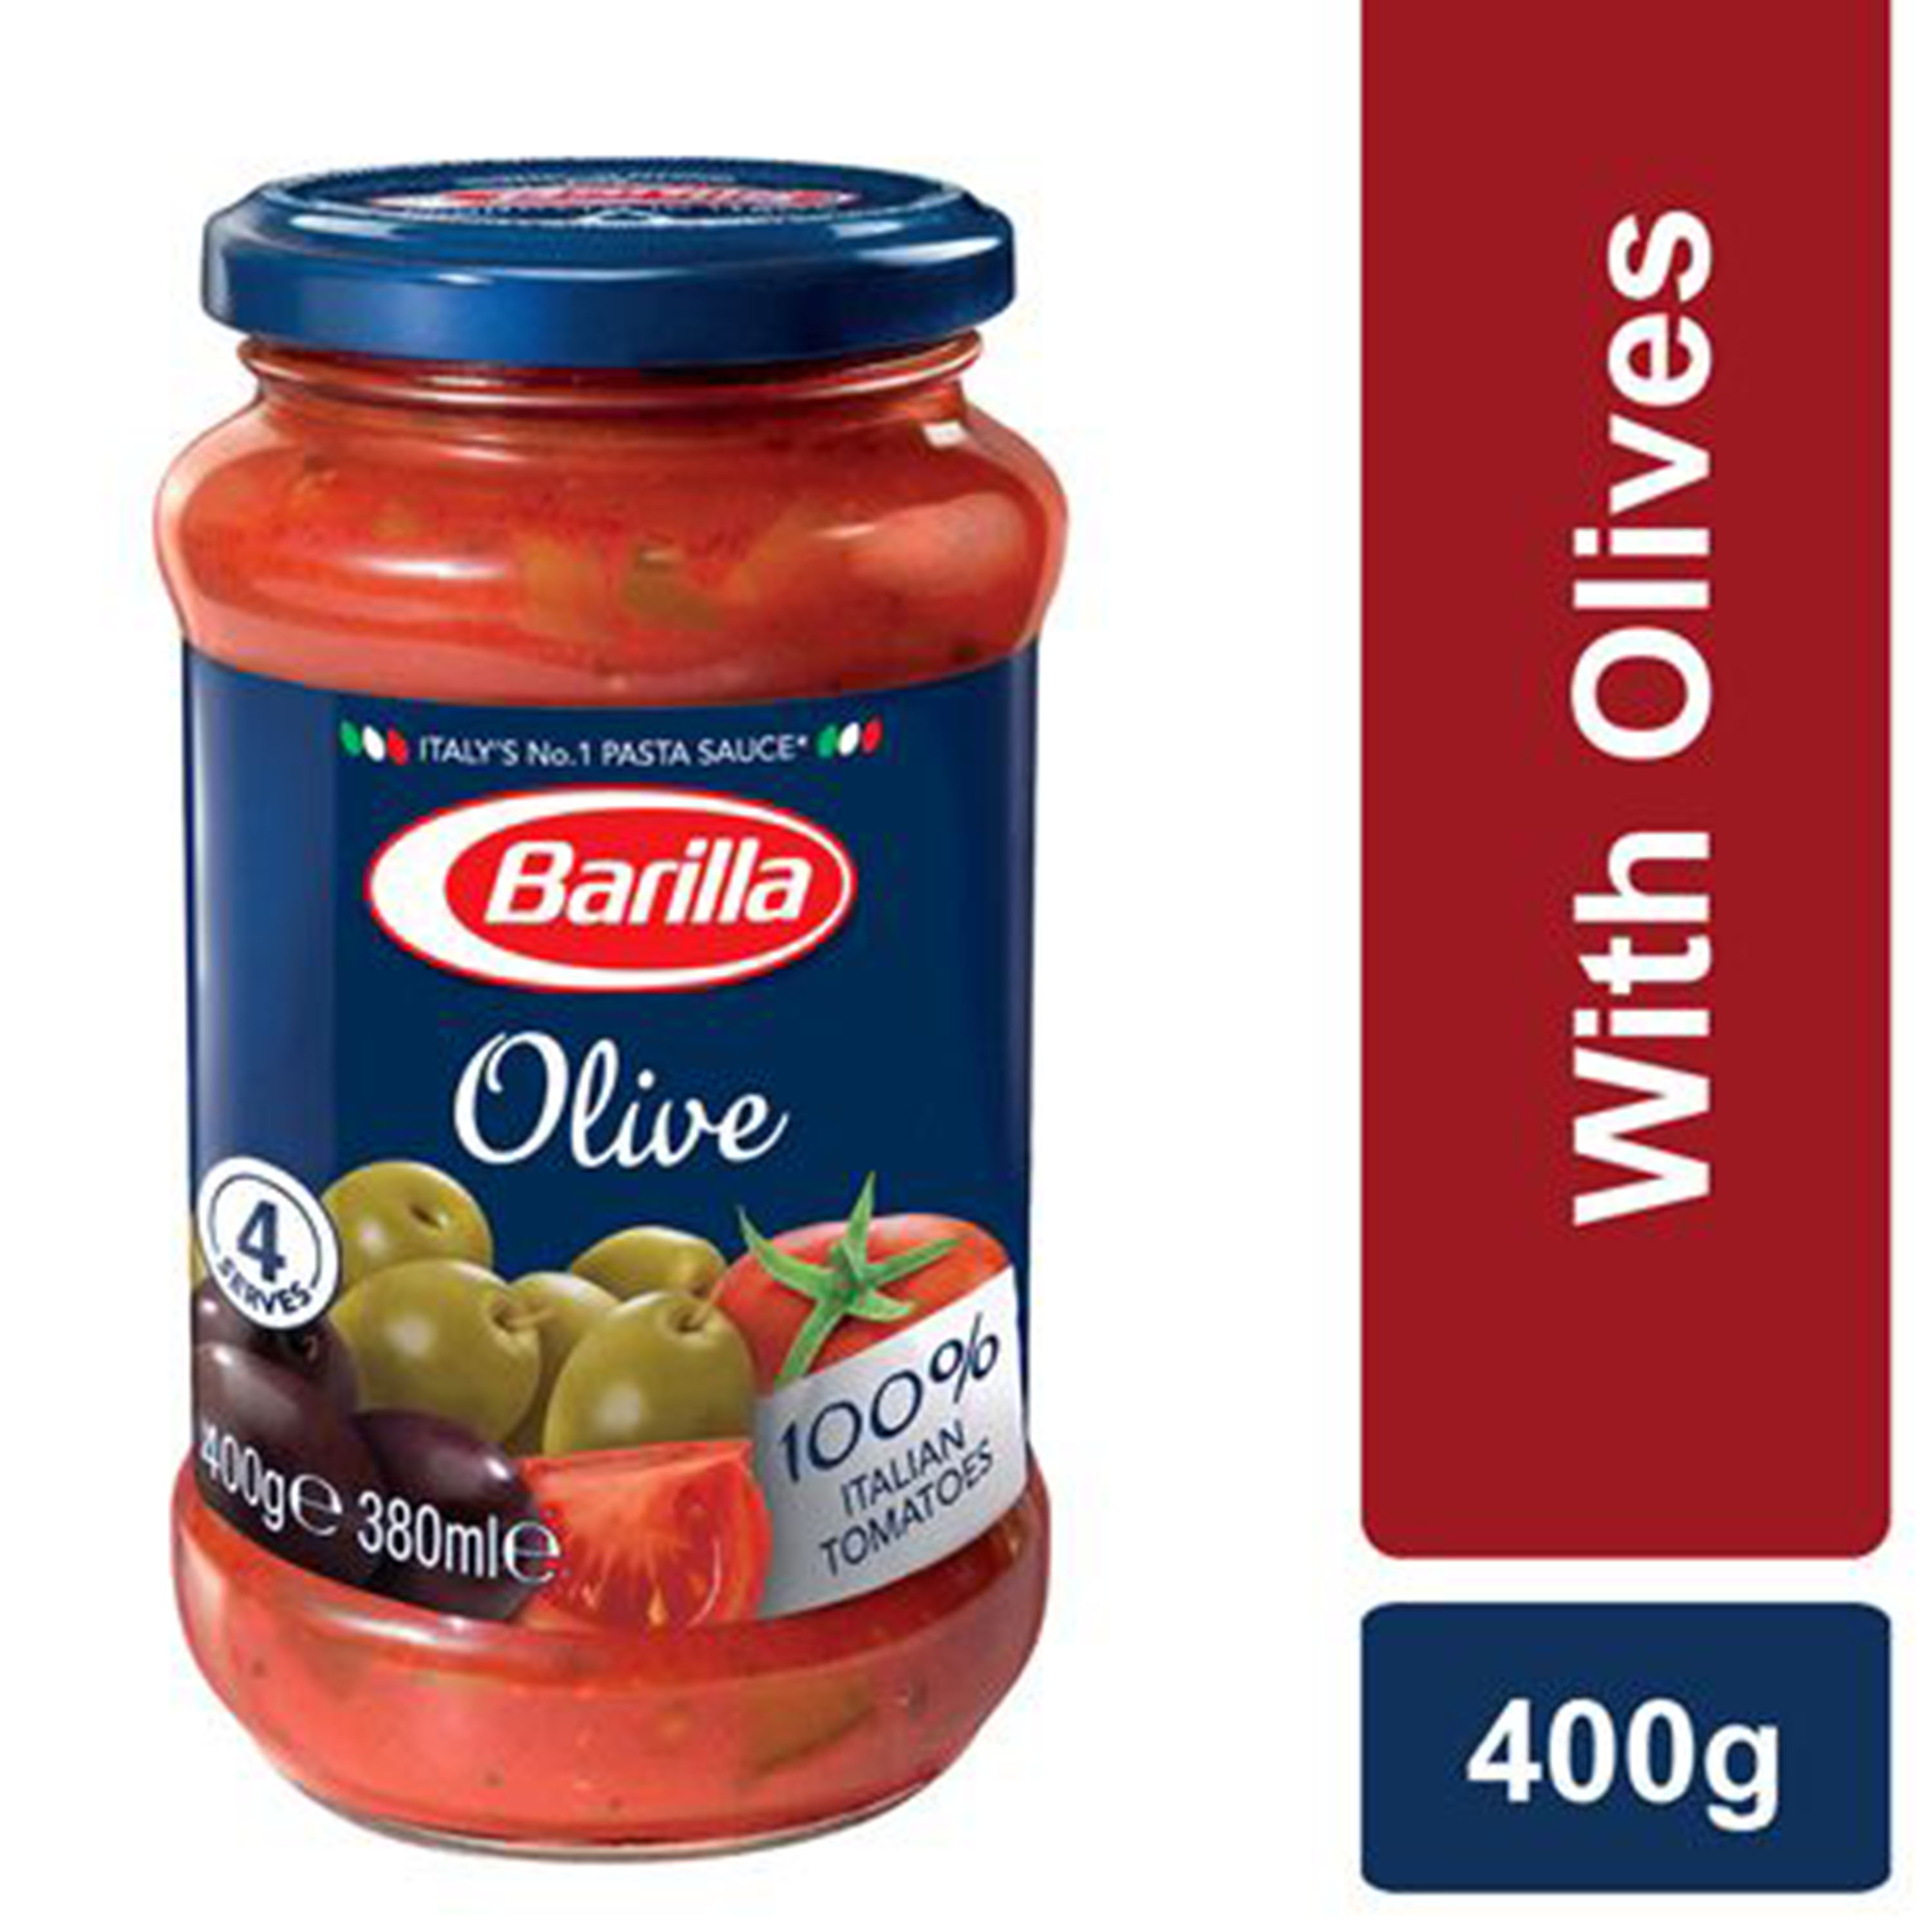 Barilla Olive Pasta Sauce - Made With 100% Italian Tomatoes 400g ...